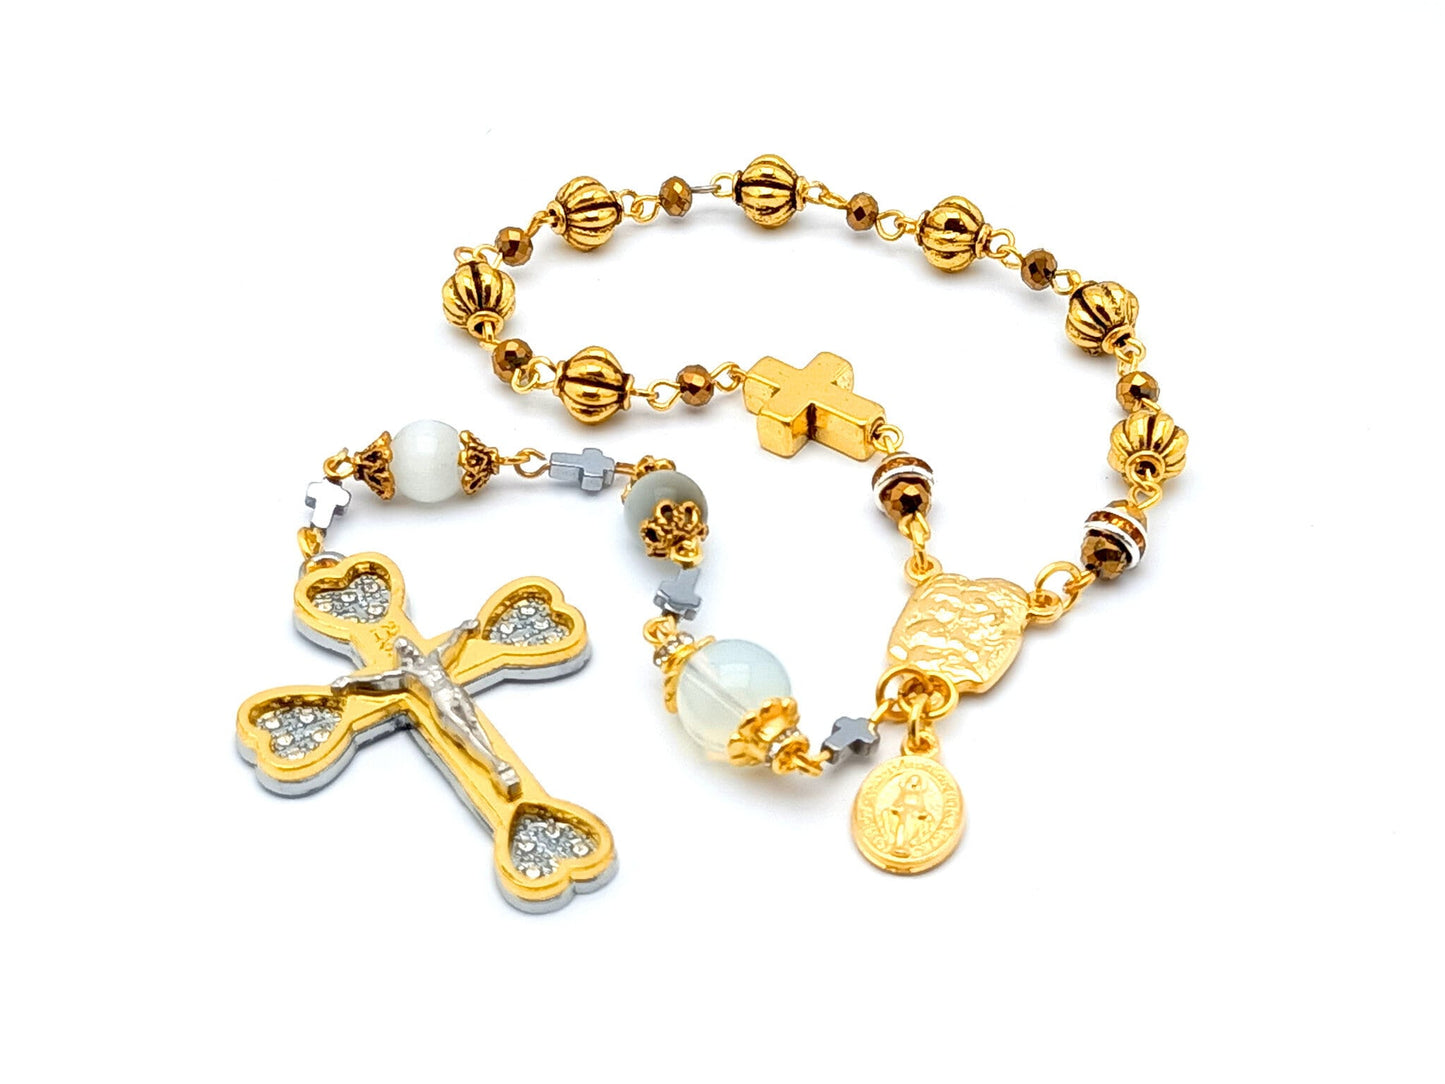 Our Lady of Sorrows unique rosary beads dolor rosary with golden and opal beads, Holy Spirit centre and gold heart crucifix.